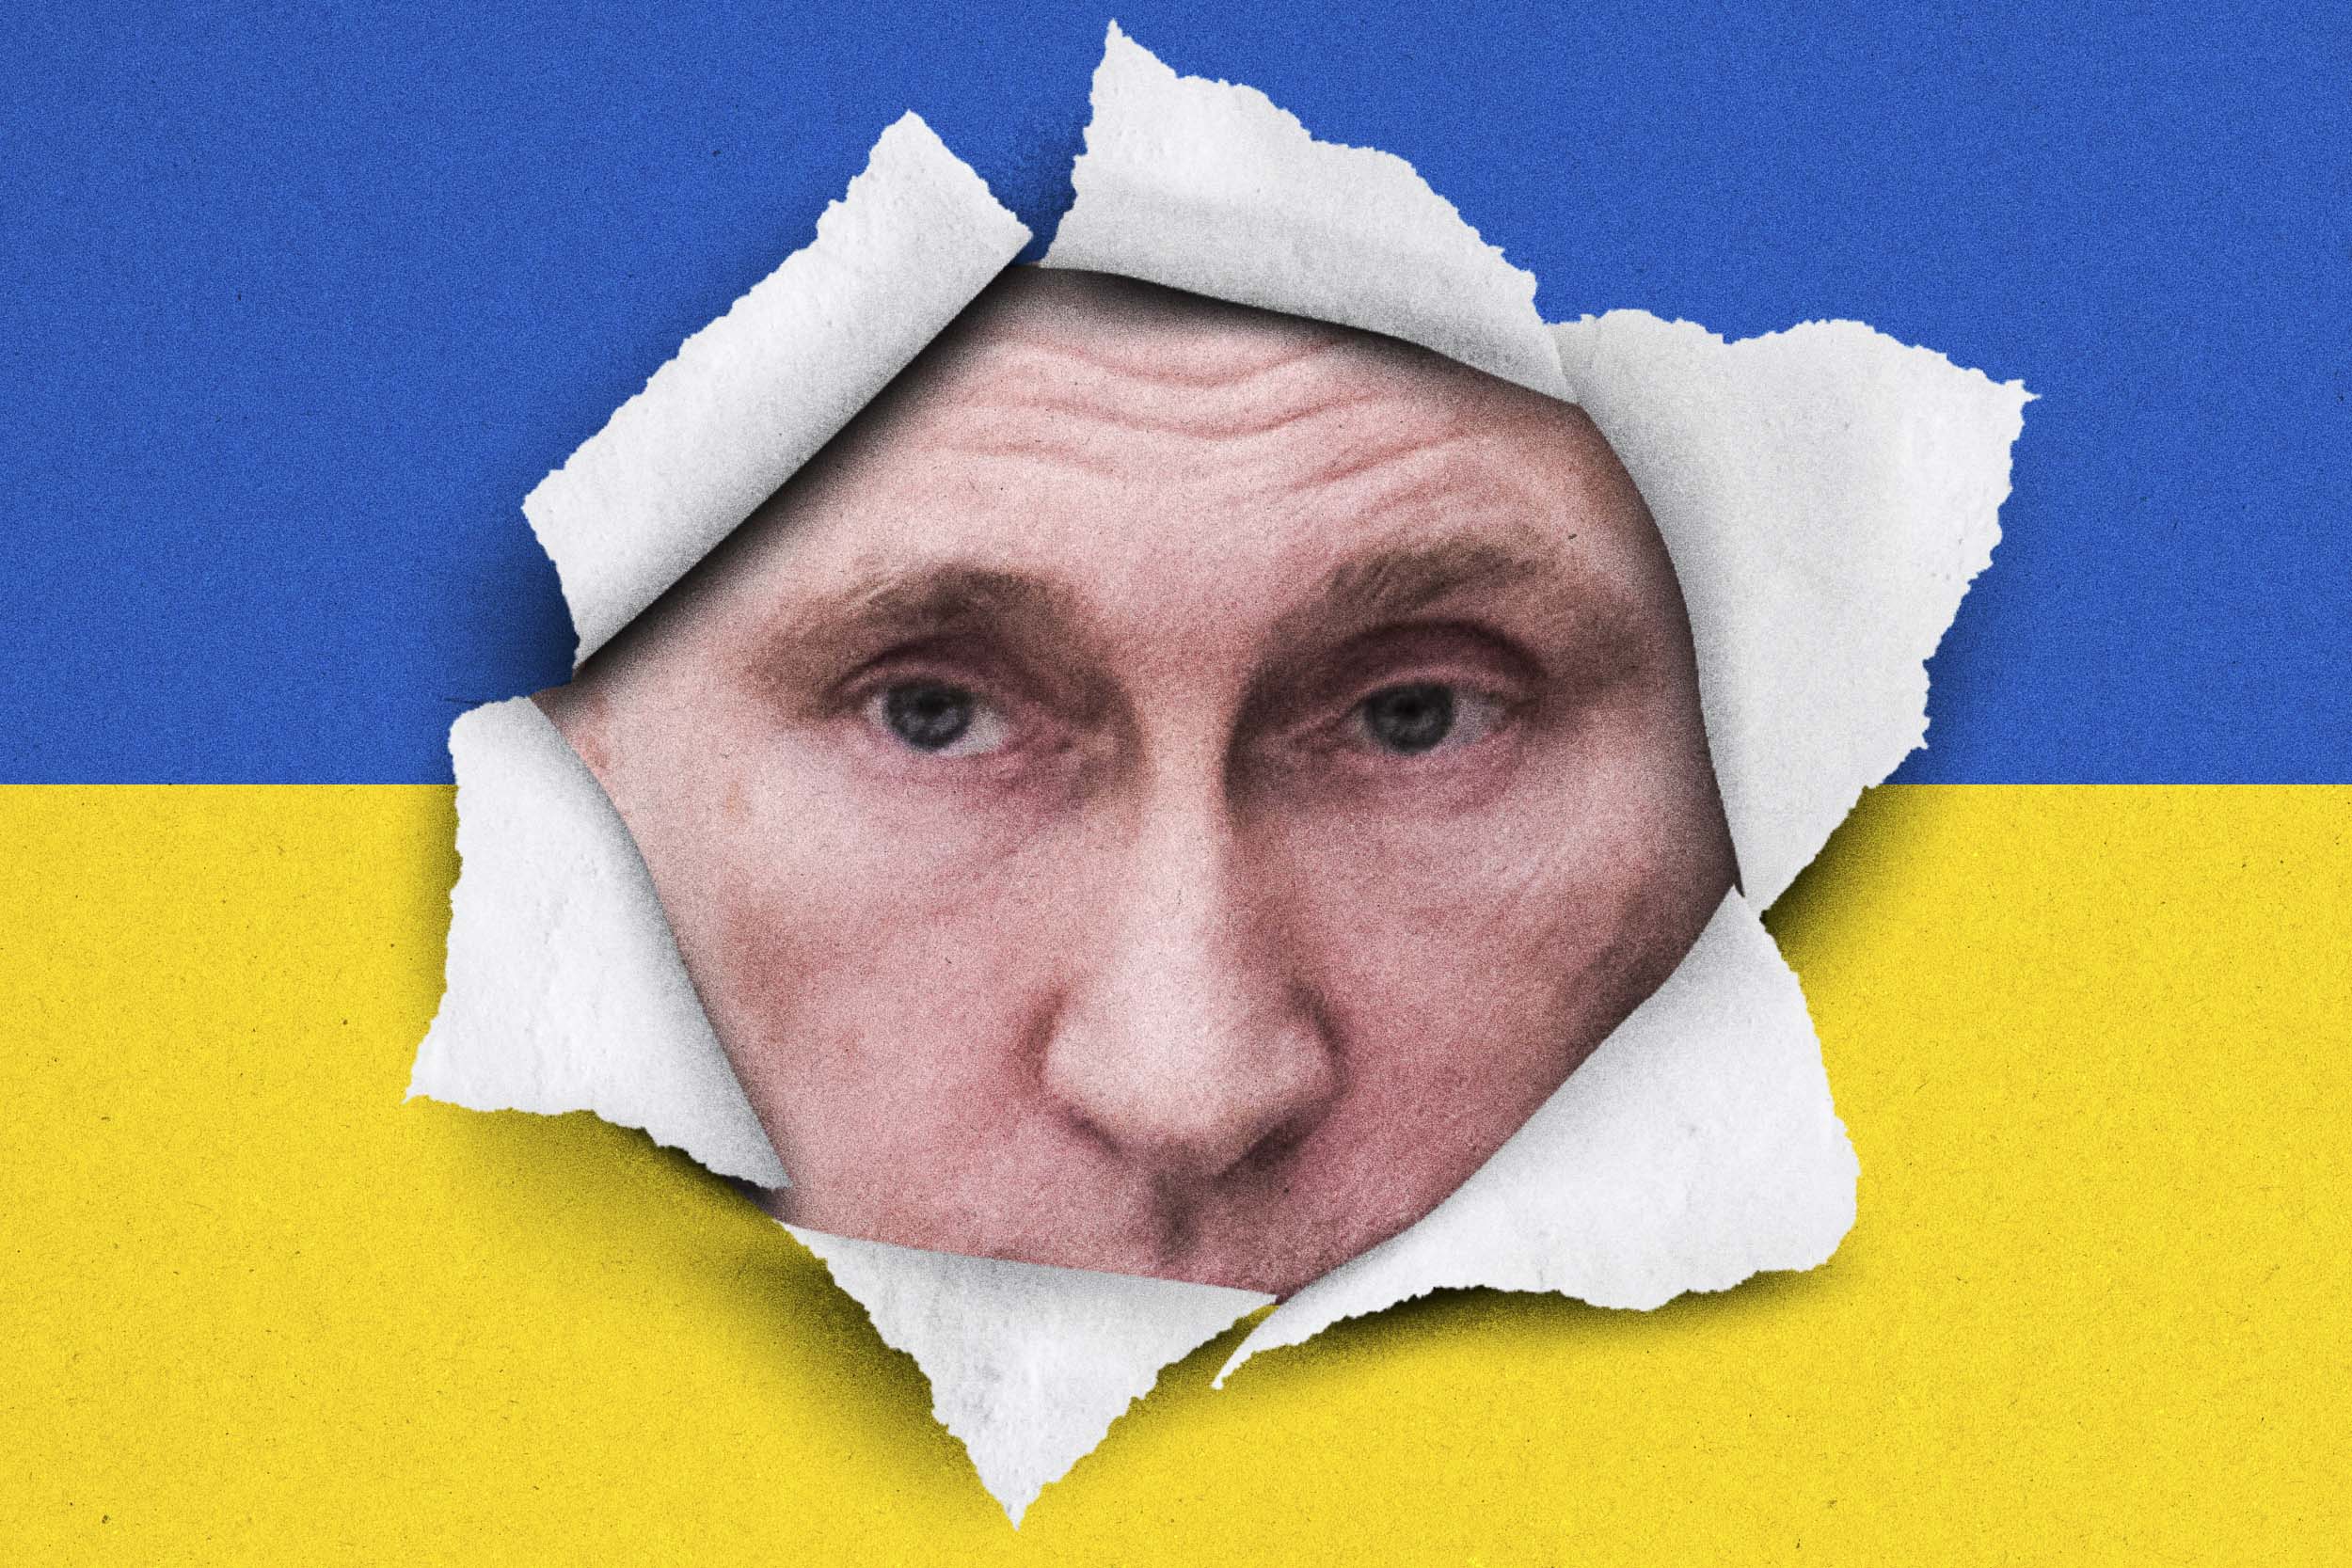 Ukraine flag with Puttin's face busting through the middle